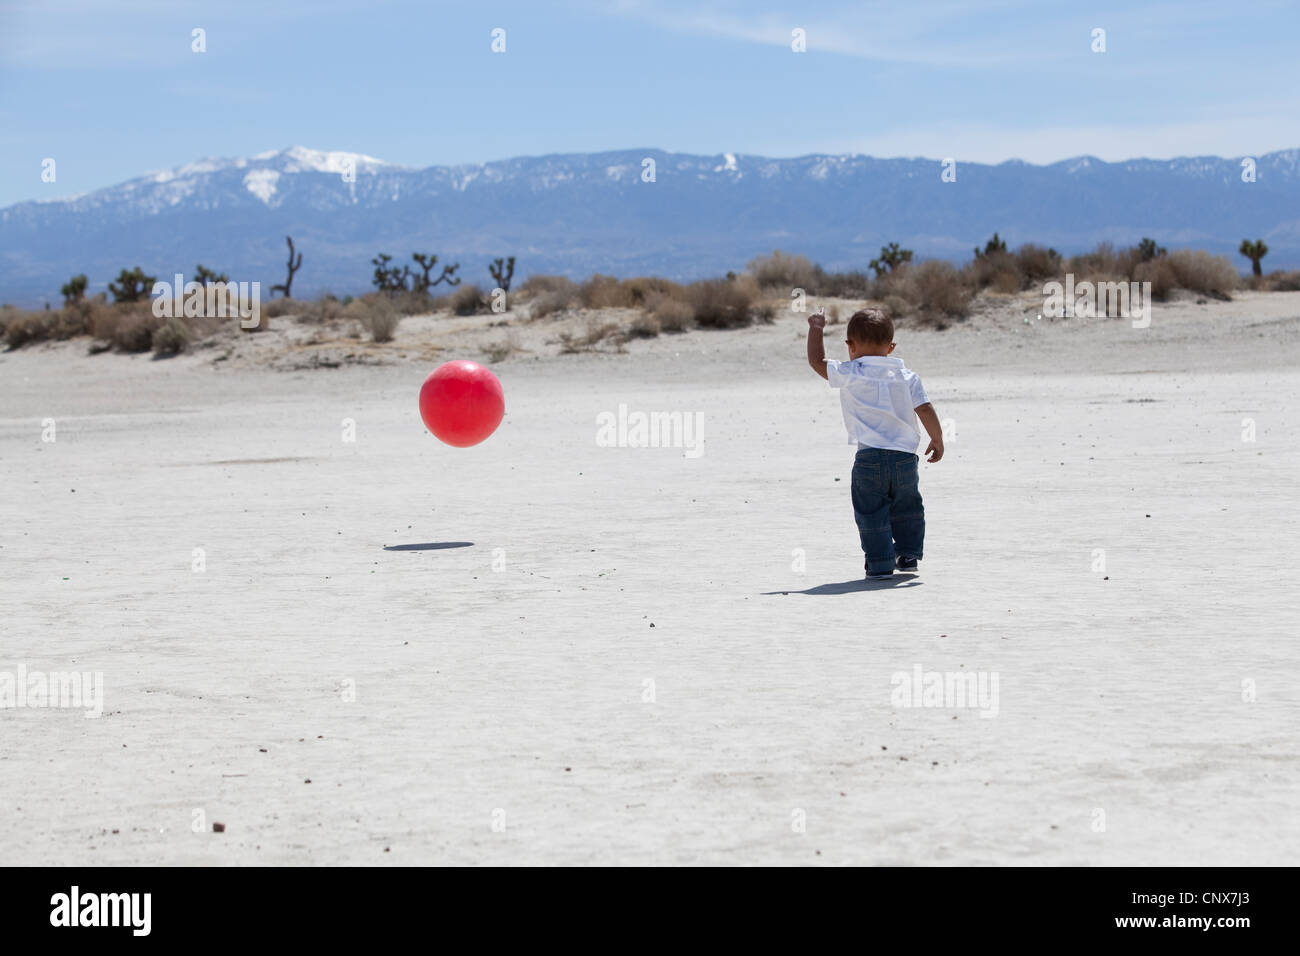 Child playing with a red ball in the desert Stock Photo